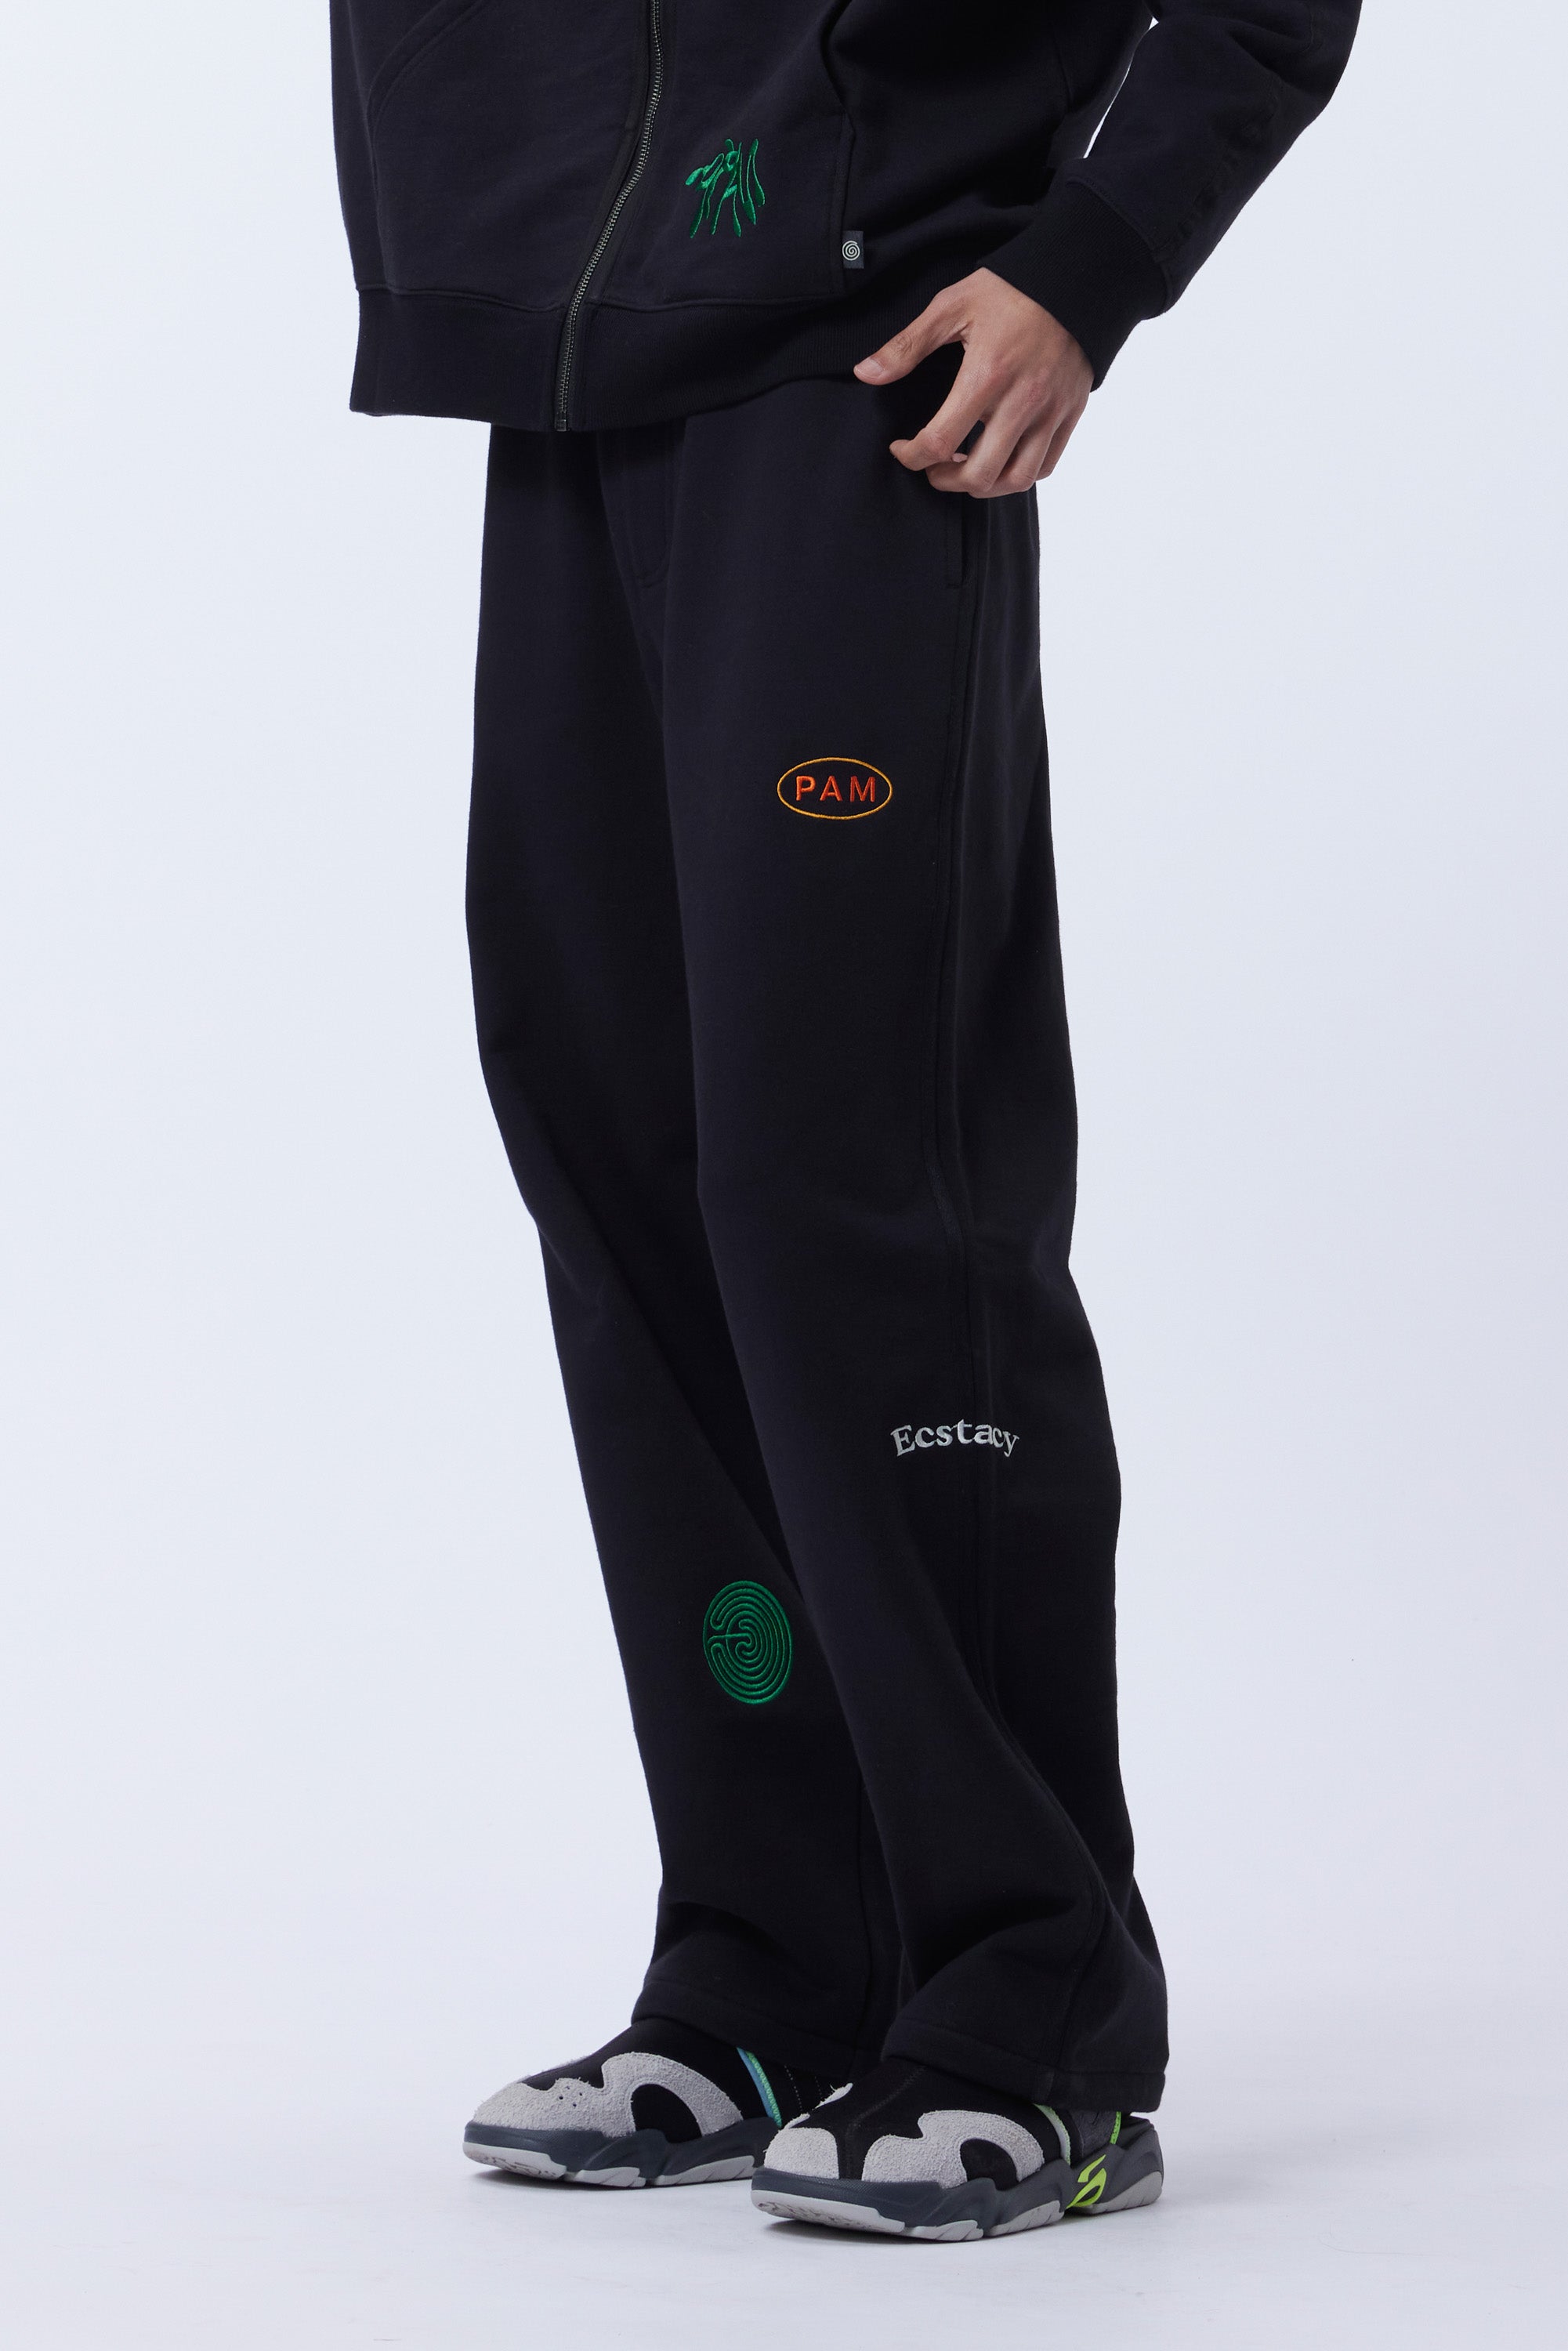 The FEATURING LOGO STRAIGHT LEG SWEAT PANT  available online with global shipping, and in PAM Stores Melbourne and Sydney.